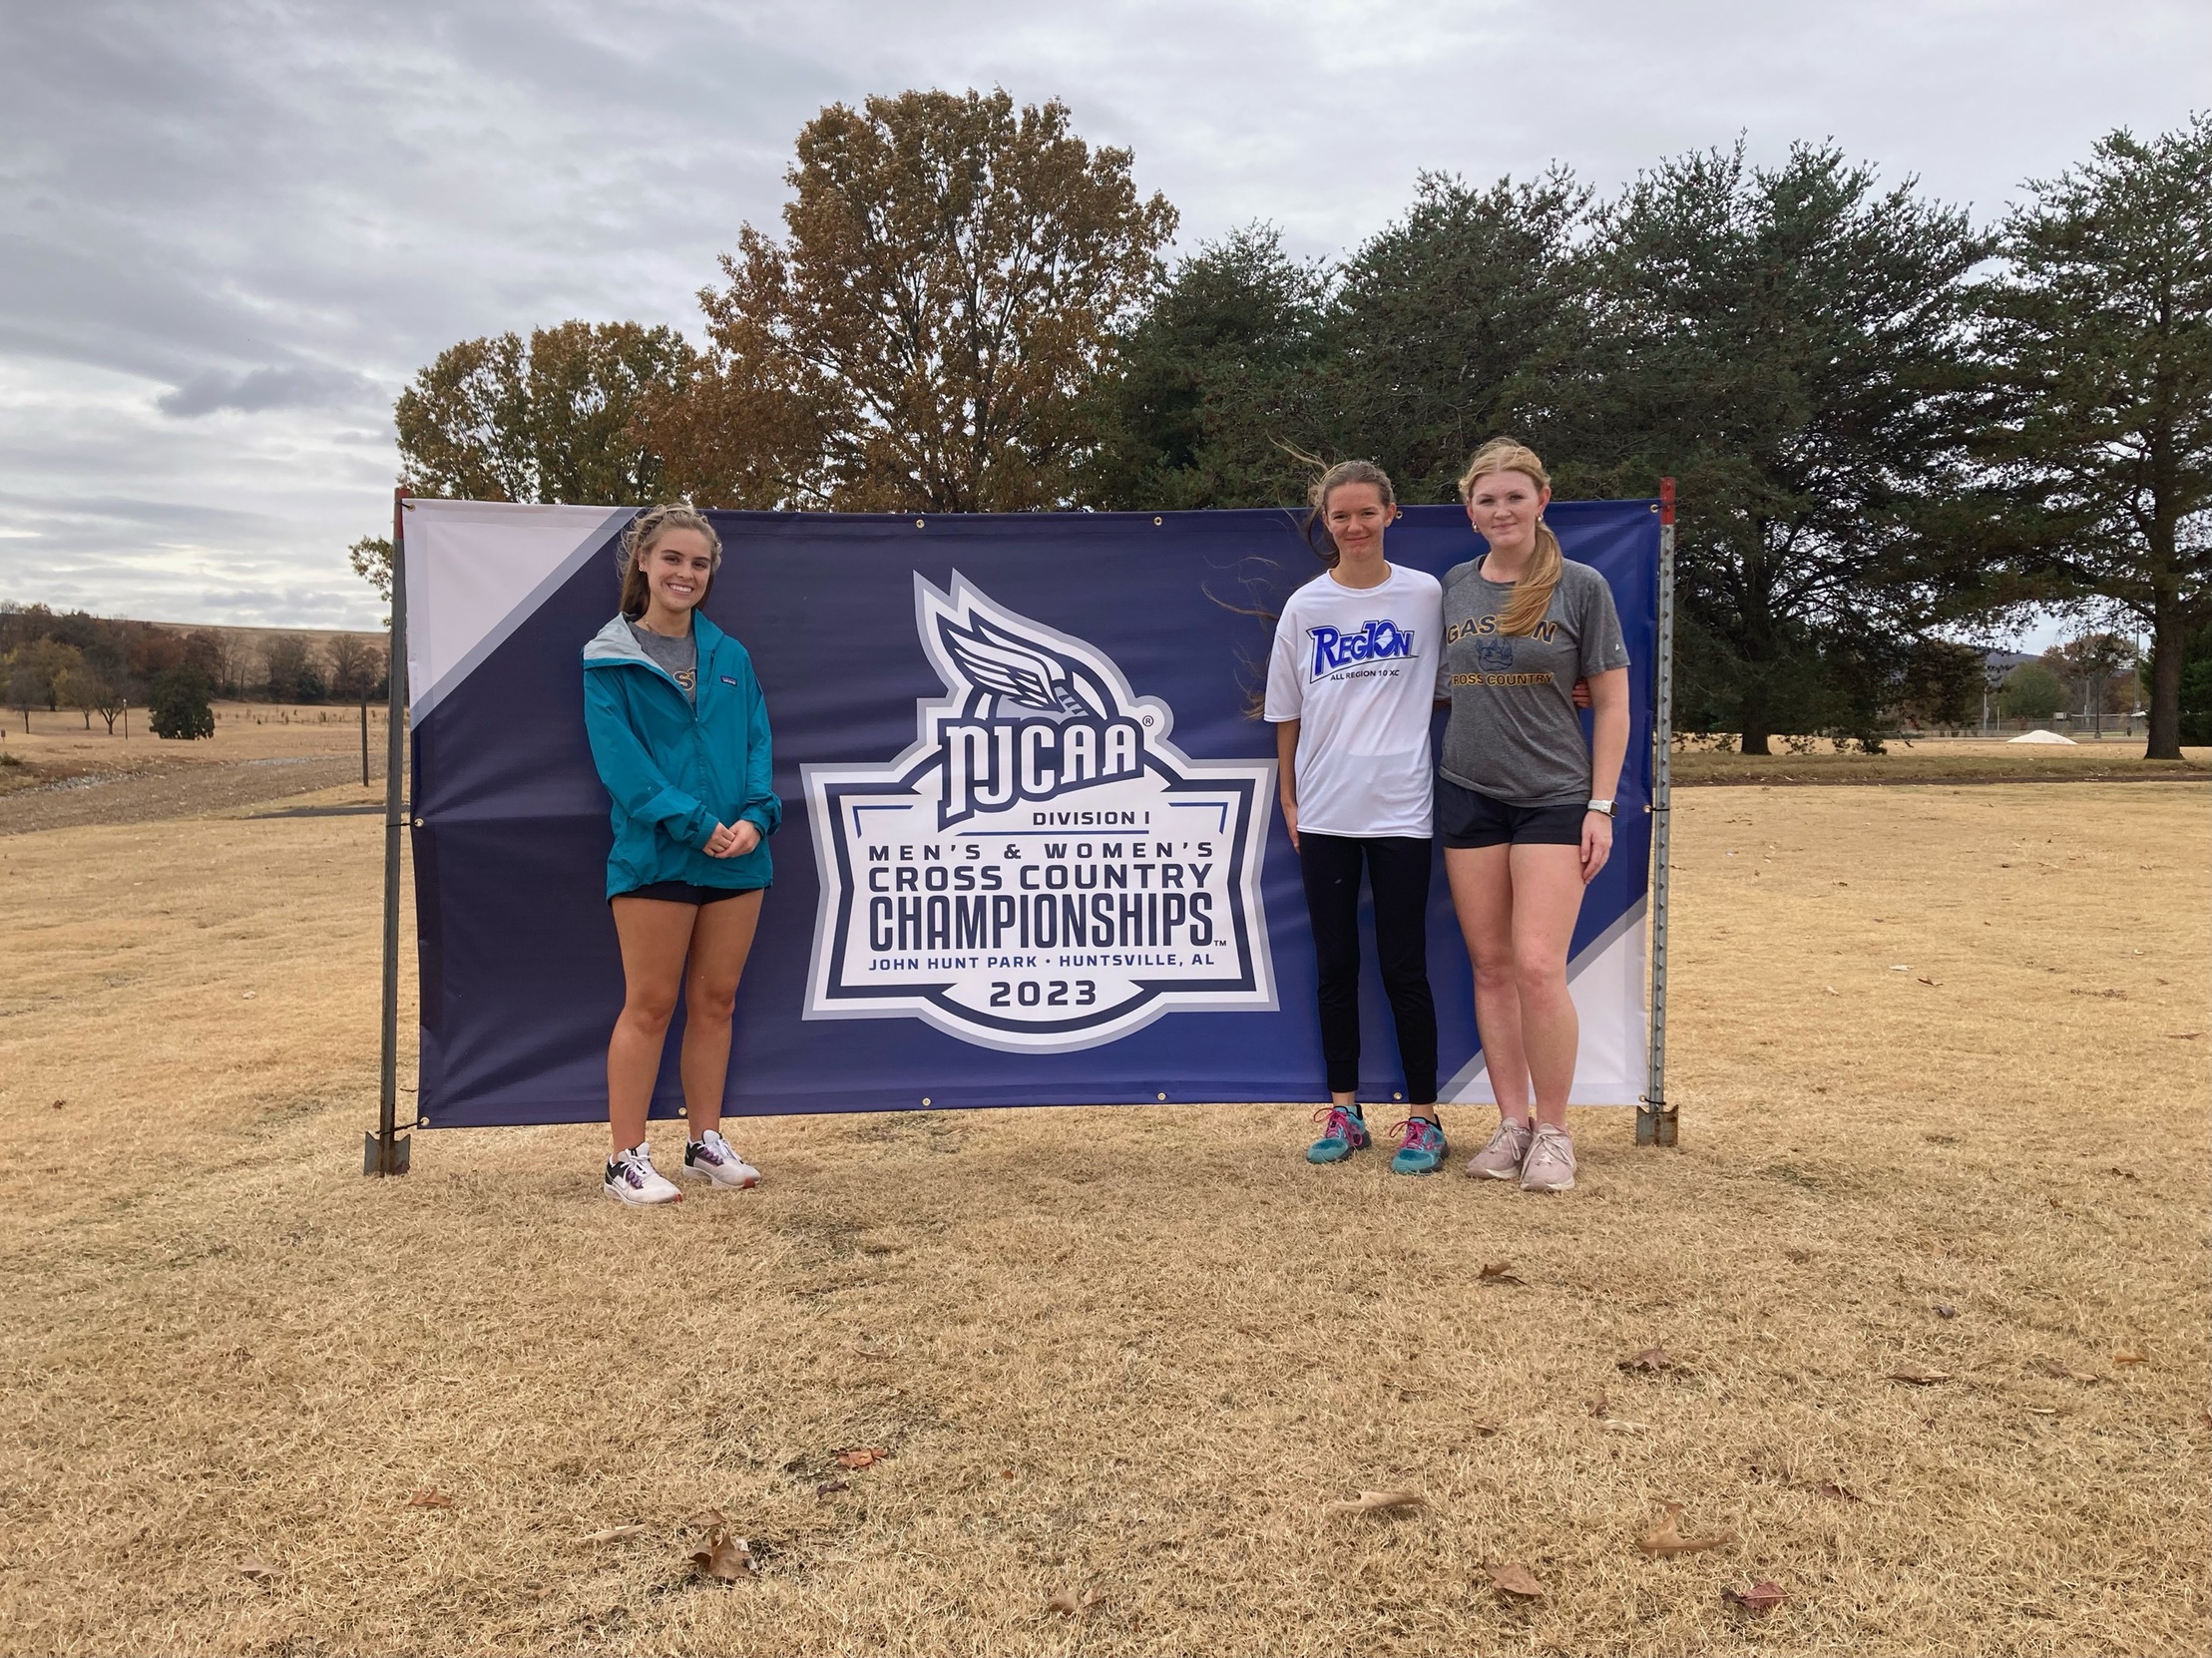 Gaston College freshmen Abigale Harris (left to right), Keirieonna Wilson and Abbygale King at last weekend's 2023 NJCAA national championships in Huntsville, Ala.